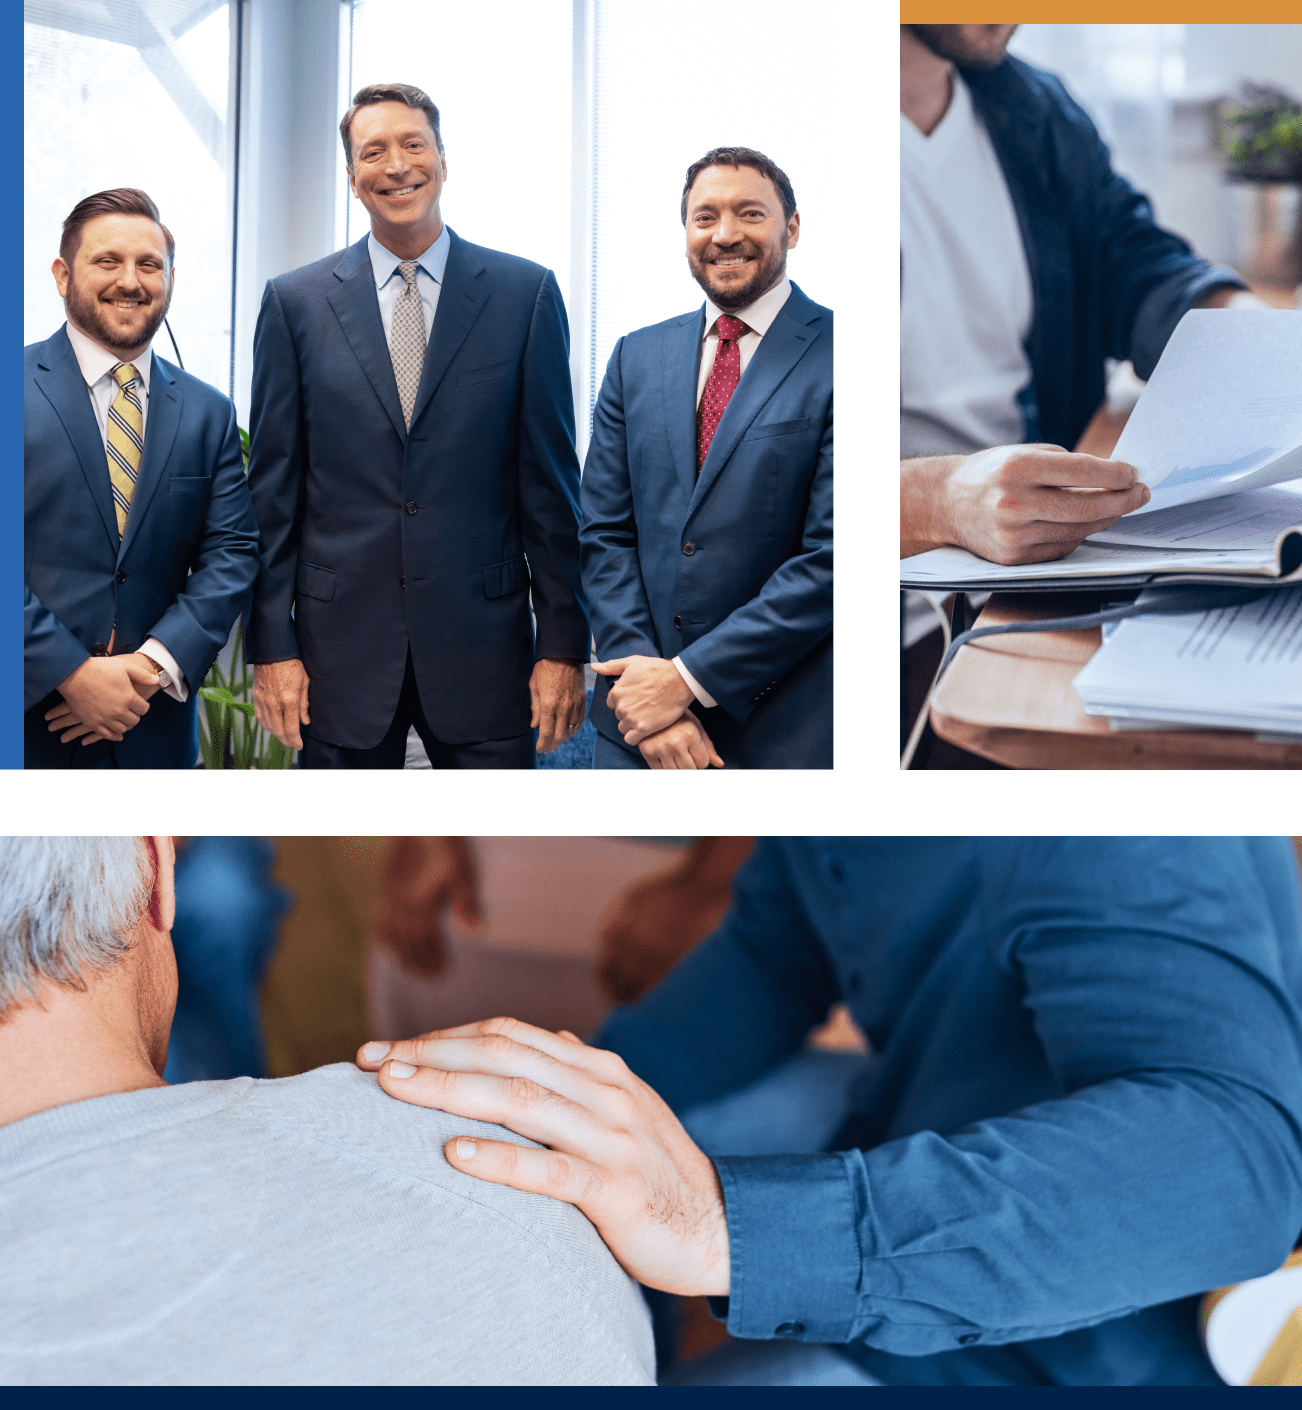 Collage: law firm team standing, office paperwork review, supportive shoulder pat.